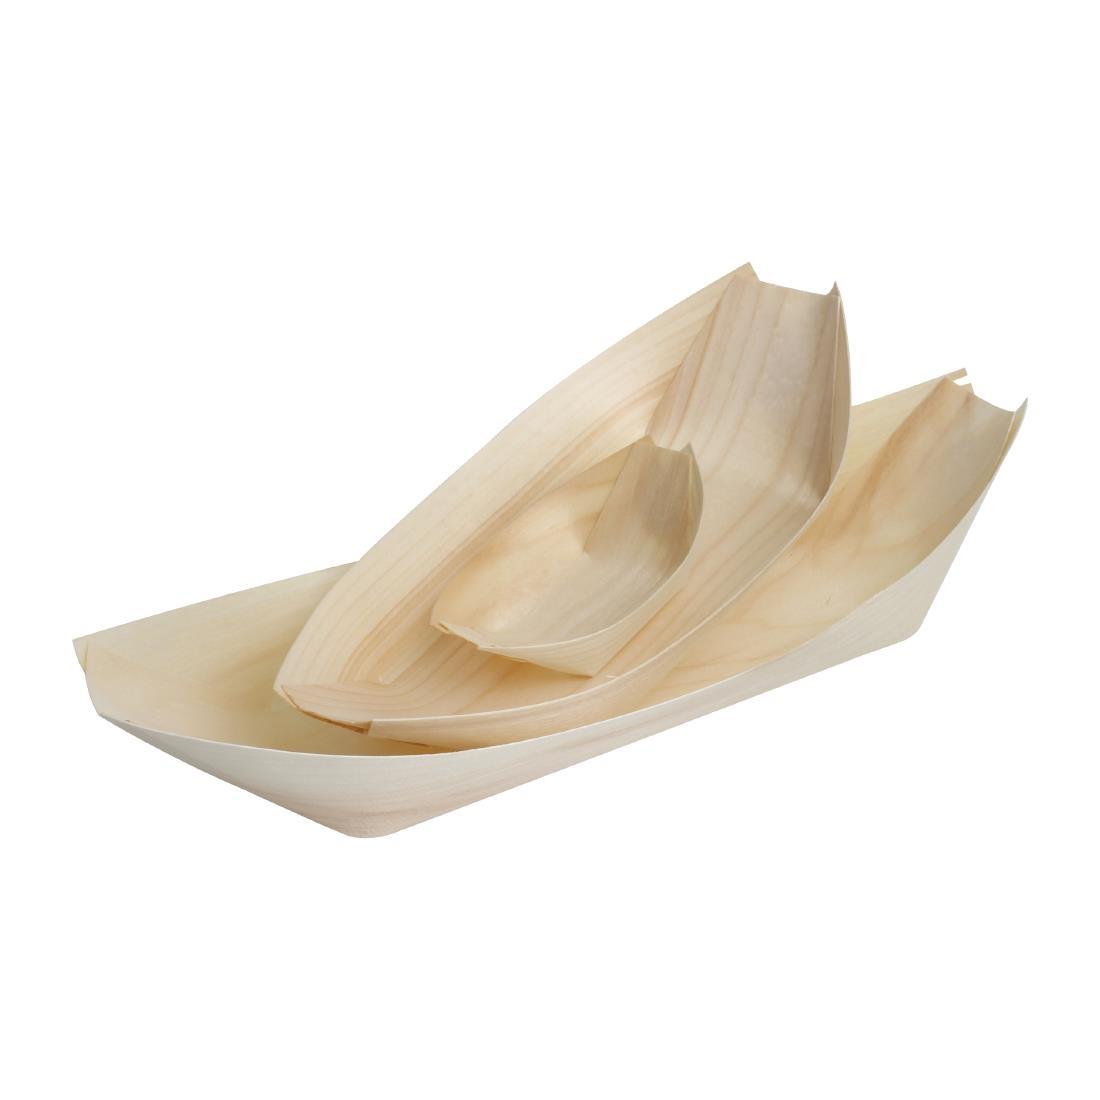 Fiesta Compostable Wooden Sushi Boats Small 80mm (Pack of 100) - DK383  - 2